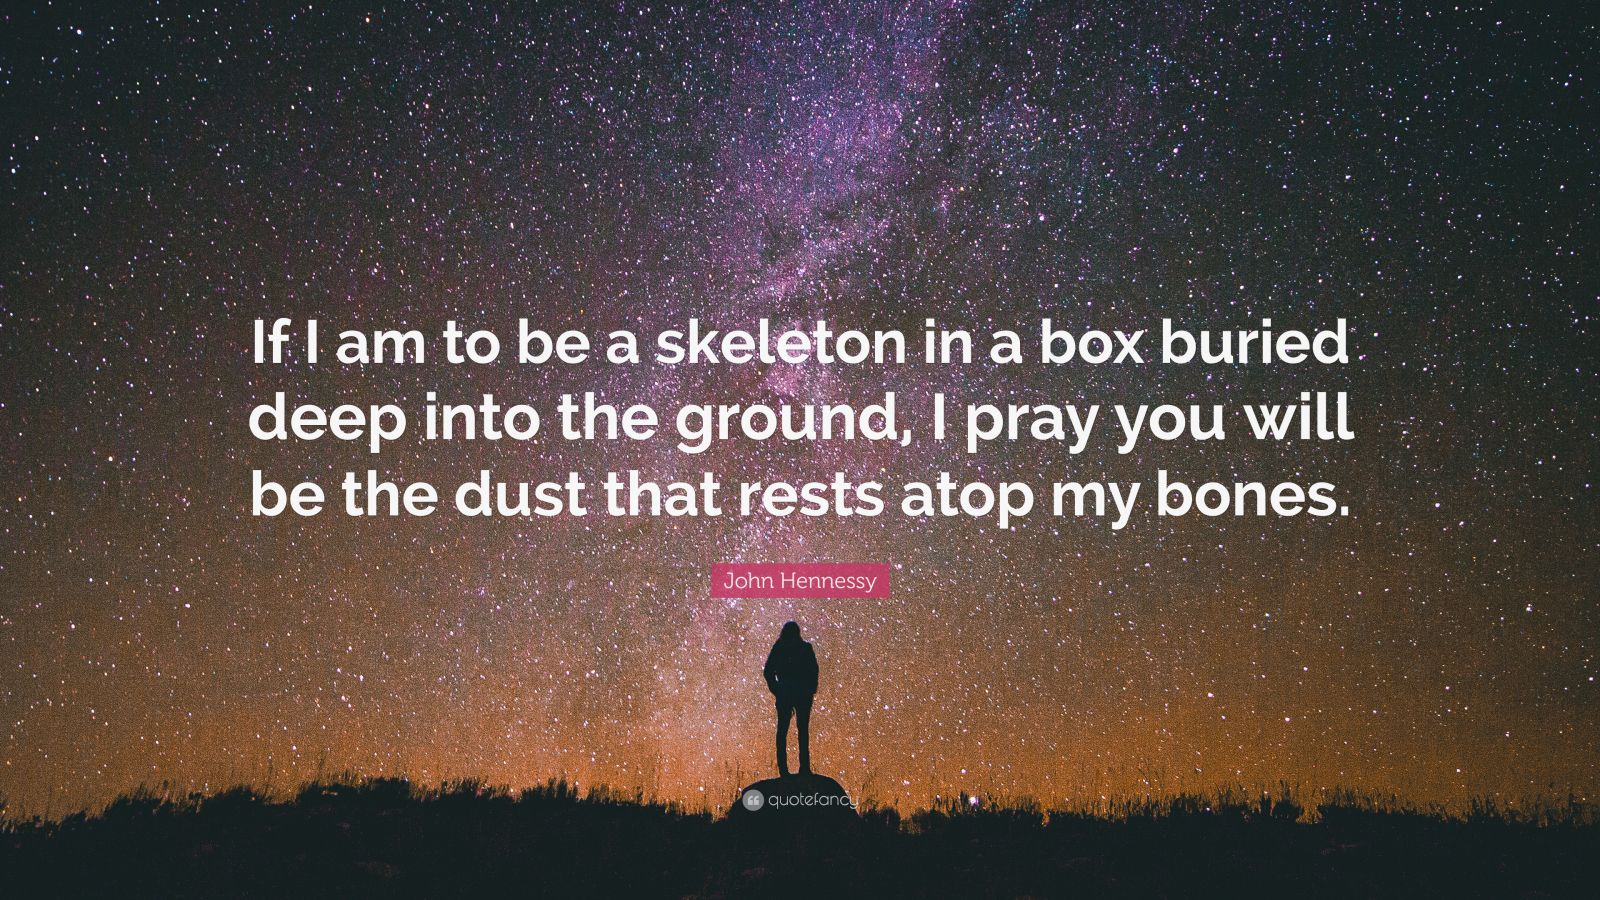 John Hennessy Quote: “If I am to be a skeleton in a box buried deep ...